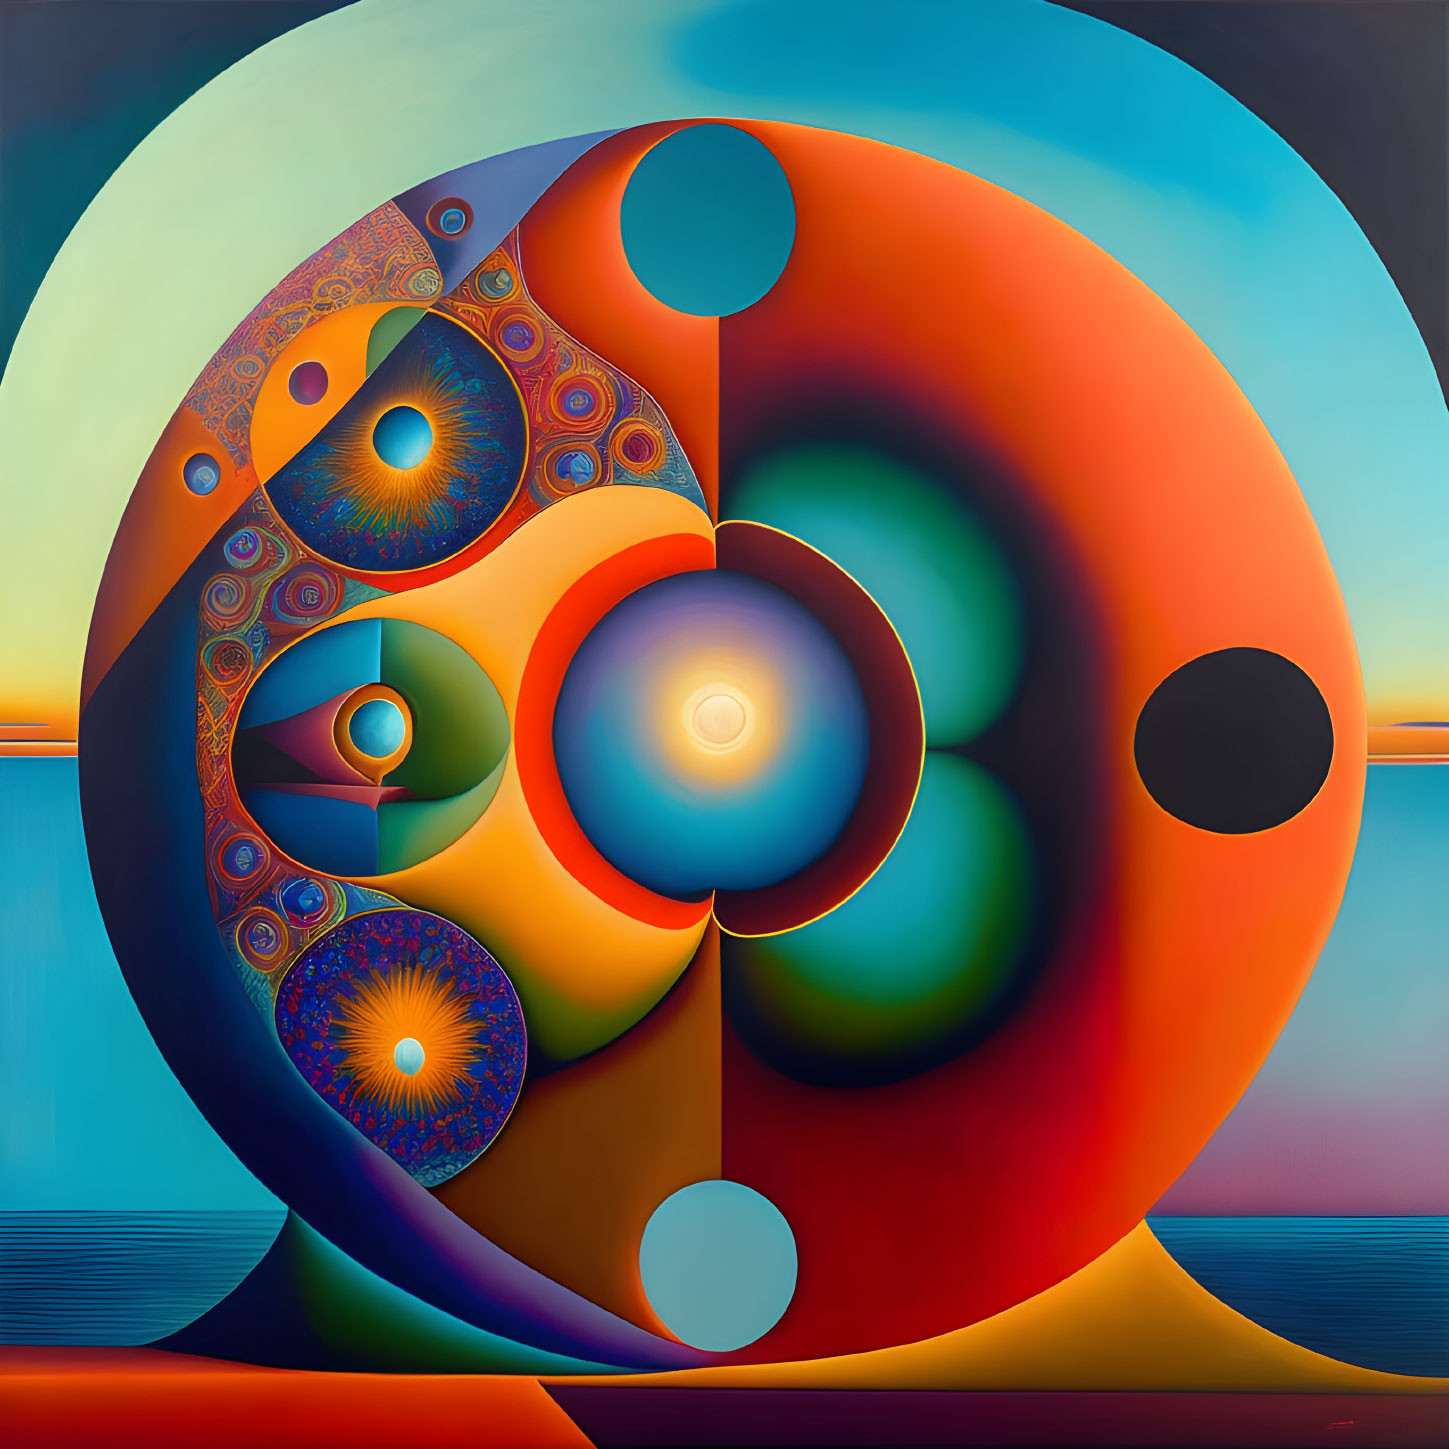 Vibrant geometric shapes and fractal patterns in abstract painting.